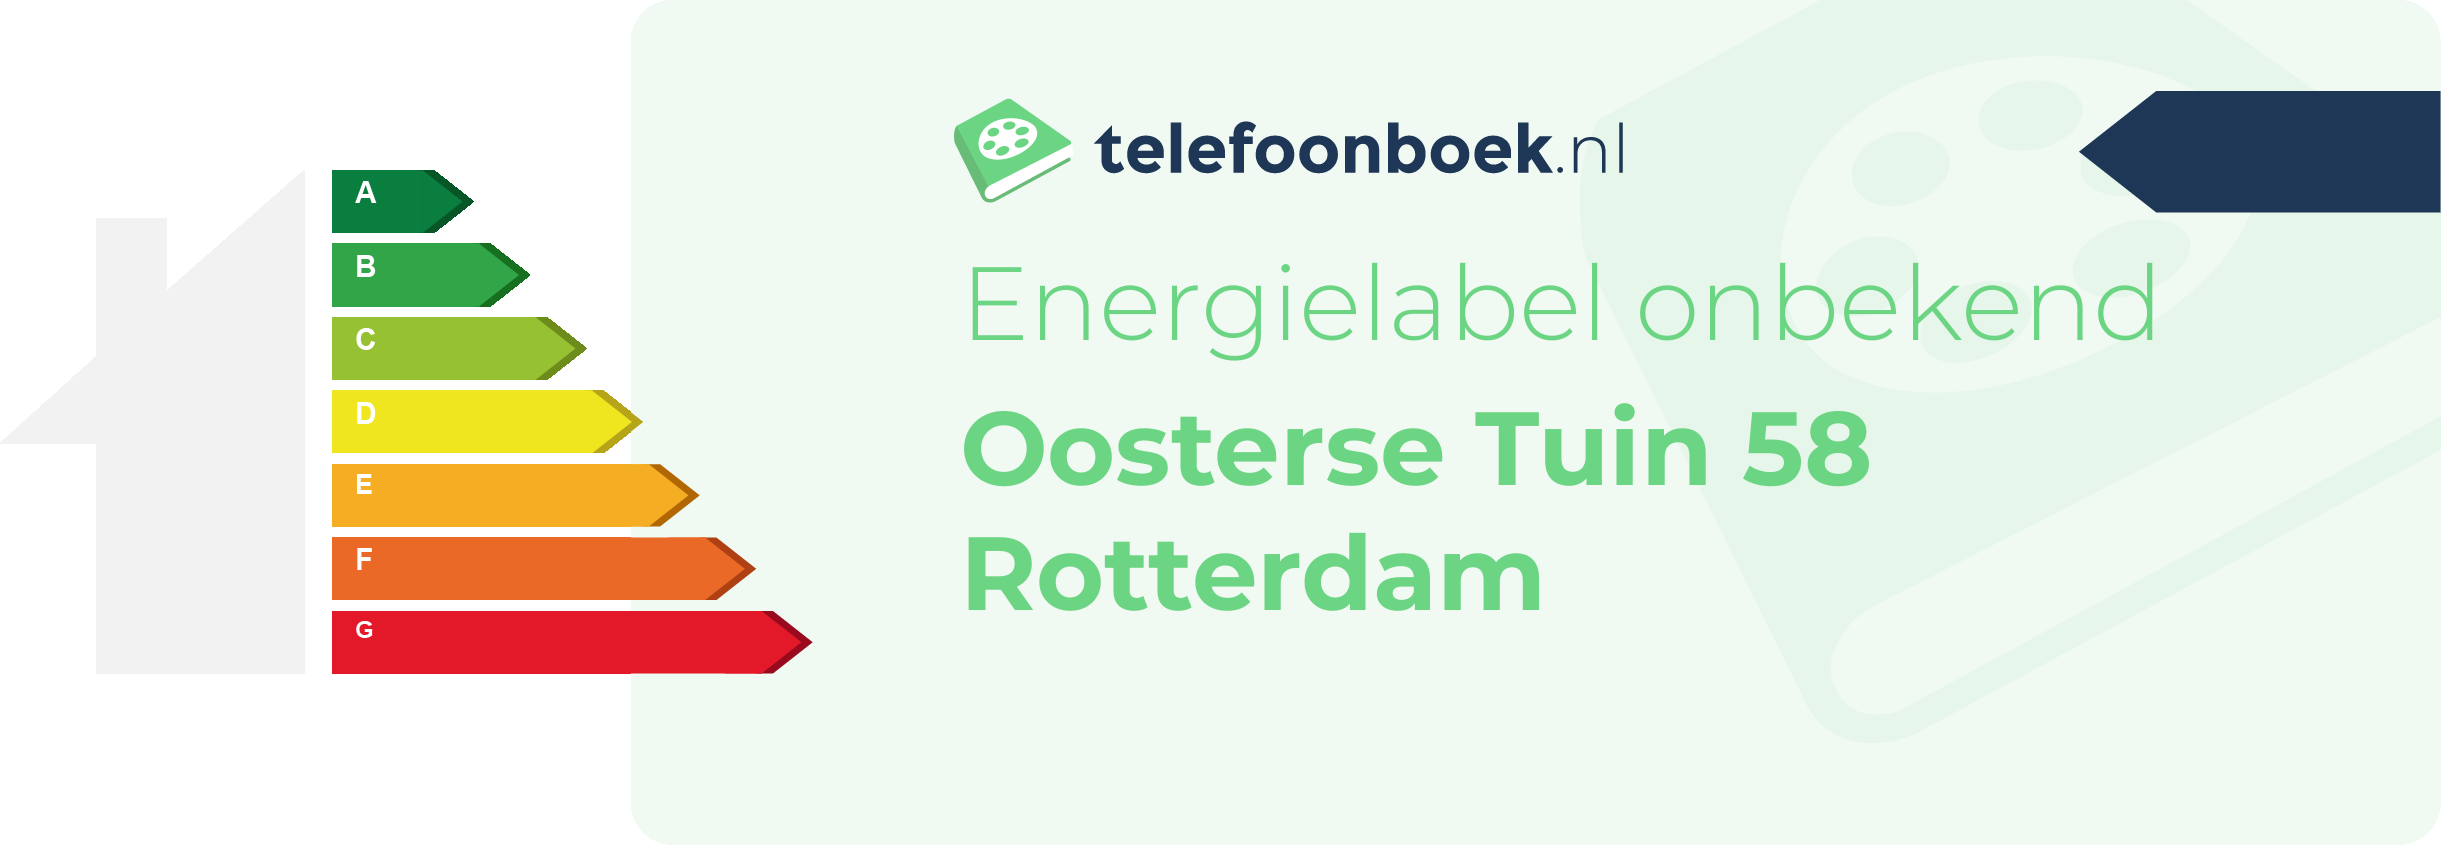 Energielabel Oosterse Tuin 58 Rotterdam